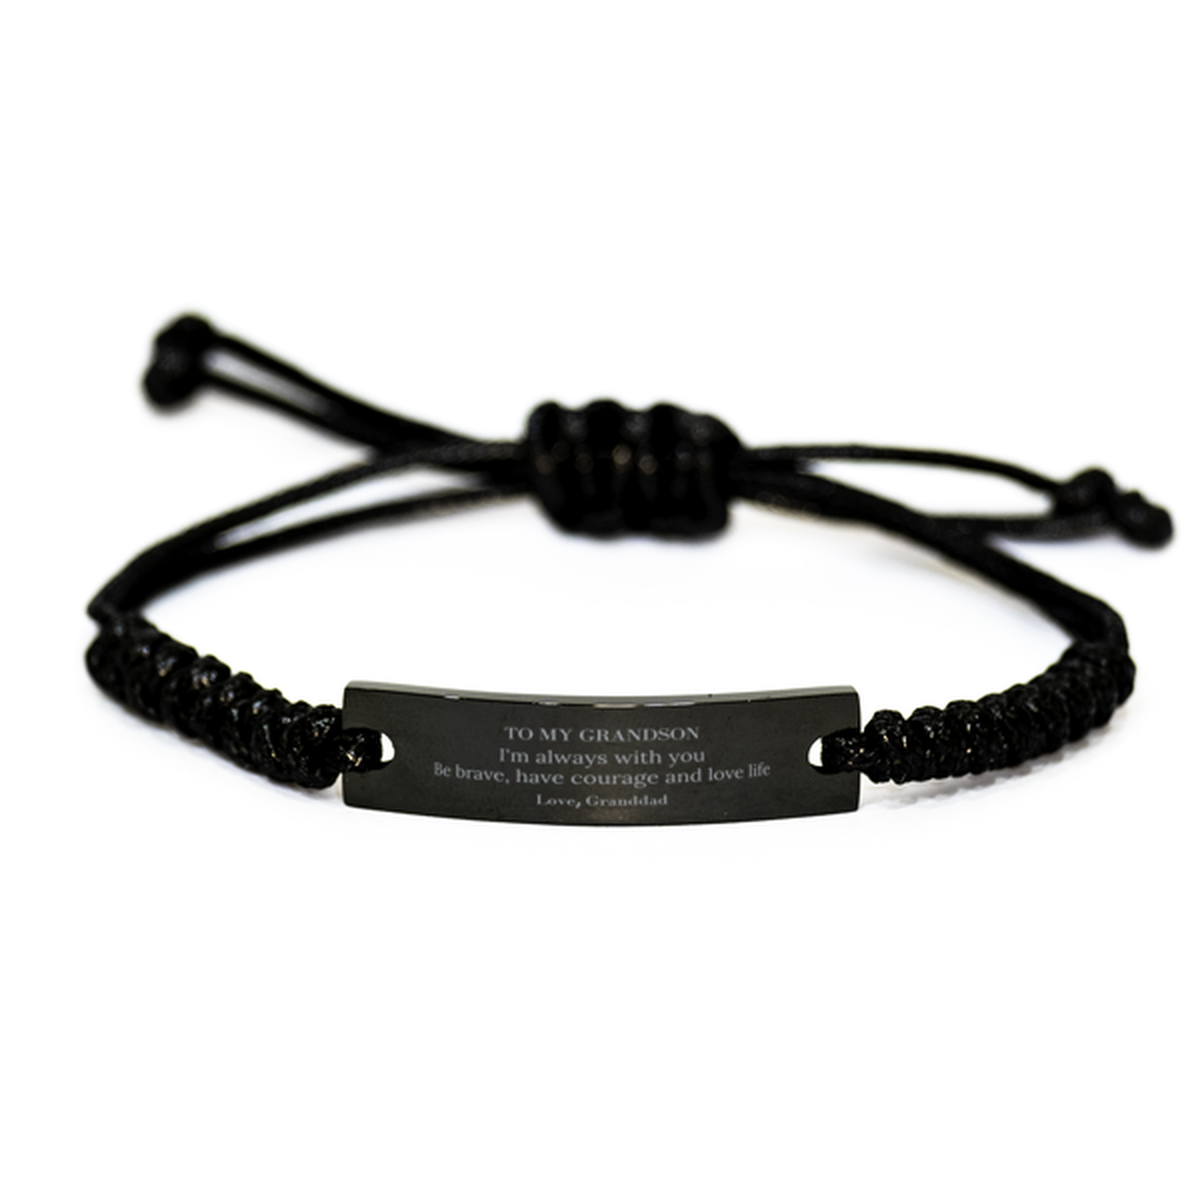 To My Grandson Gifts from Granddad, Unique Black Rope Bracelet Inspirational Christmas Birthday Graduation Gifts for Grandson I'm always with you. Be brave, have courage and love life. Love, Granddad